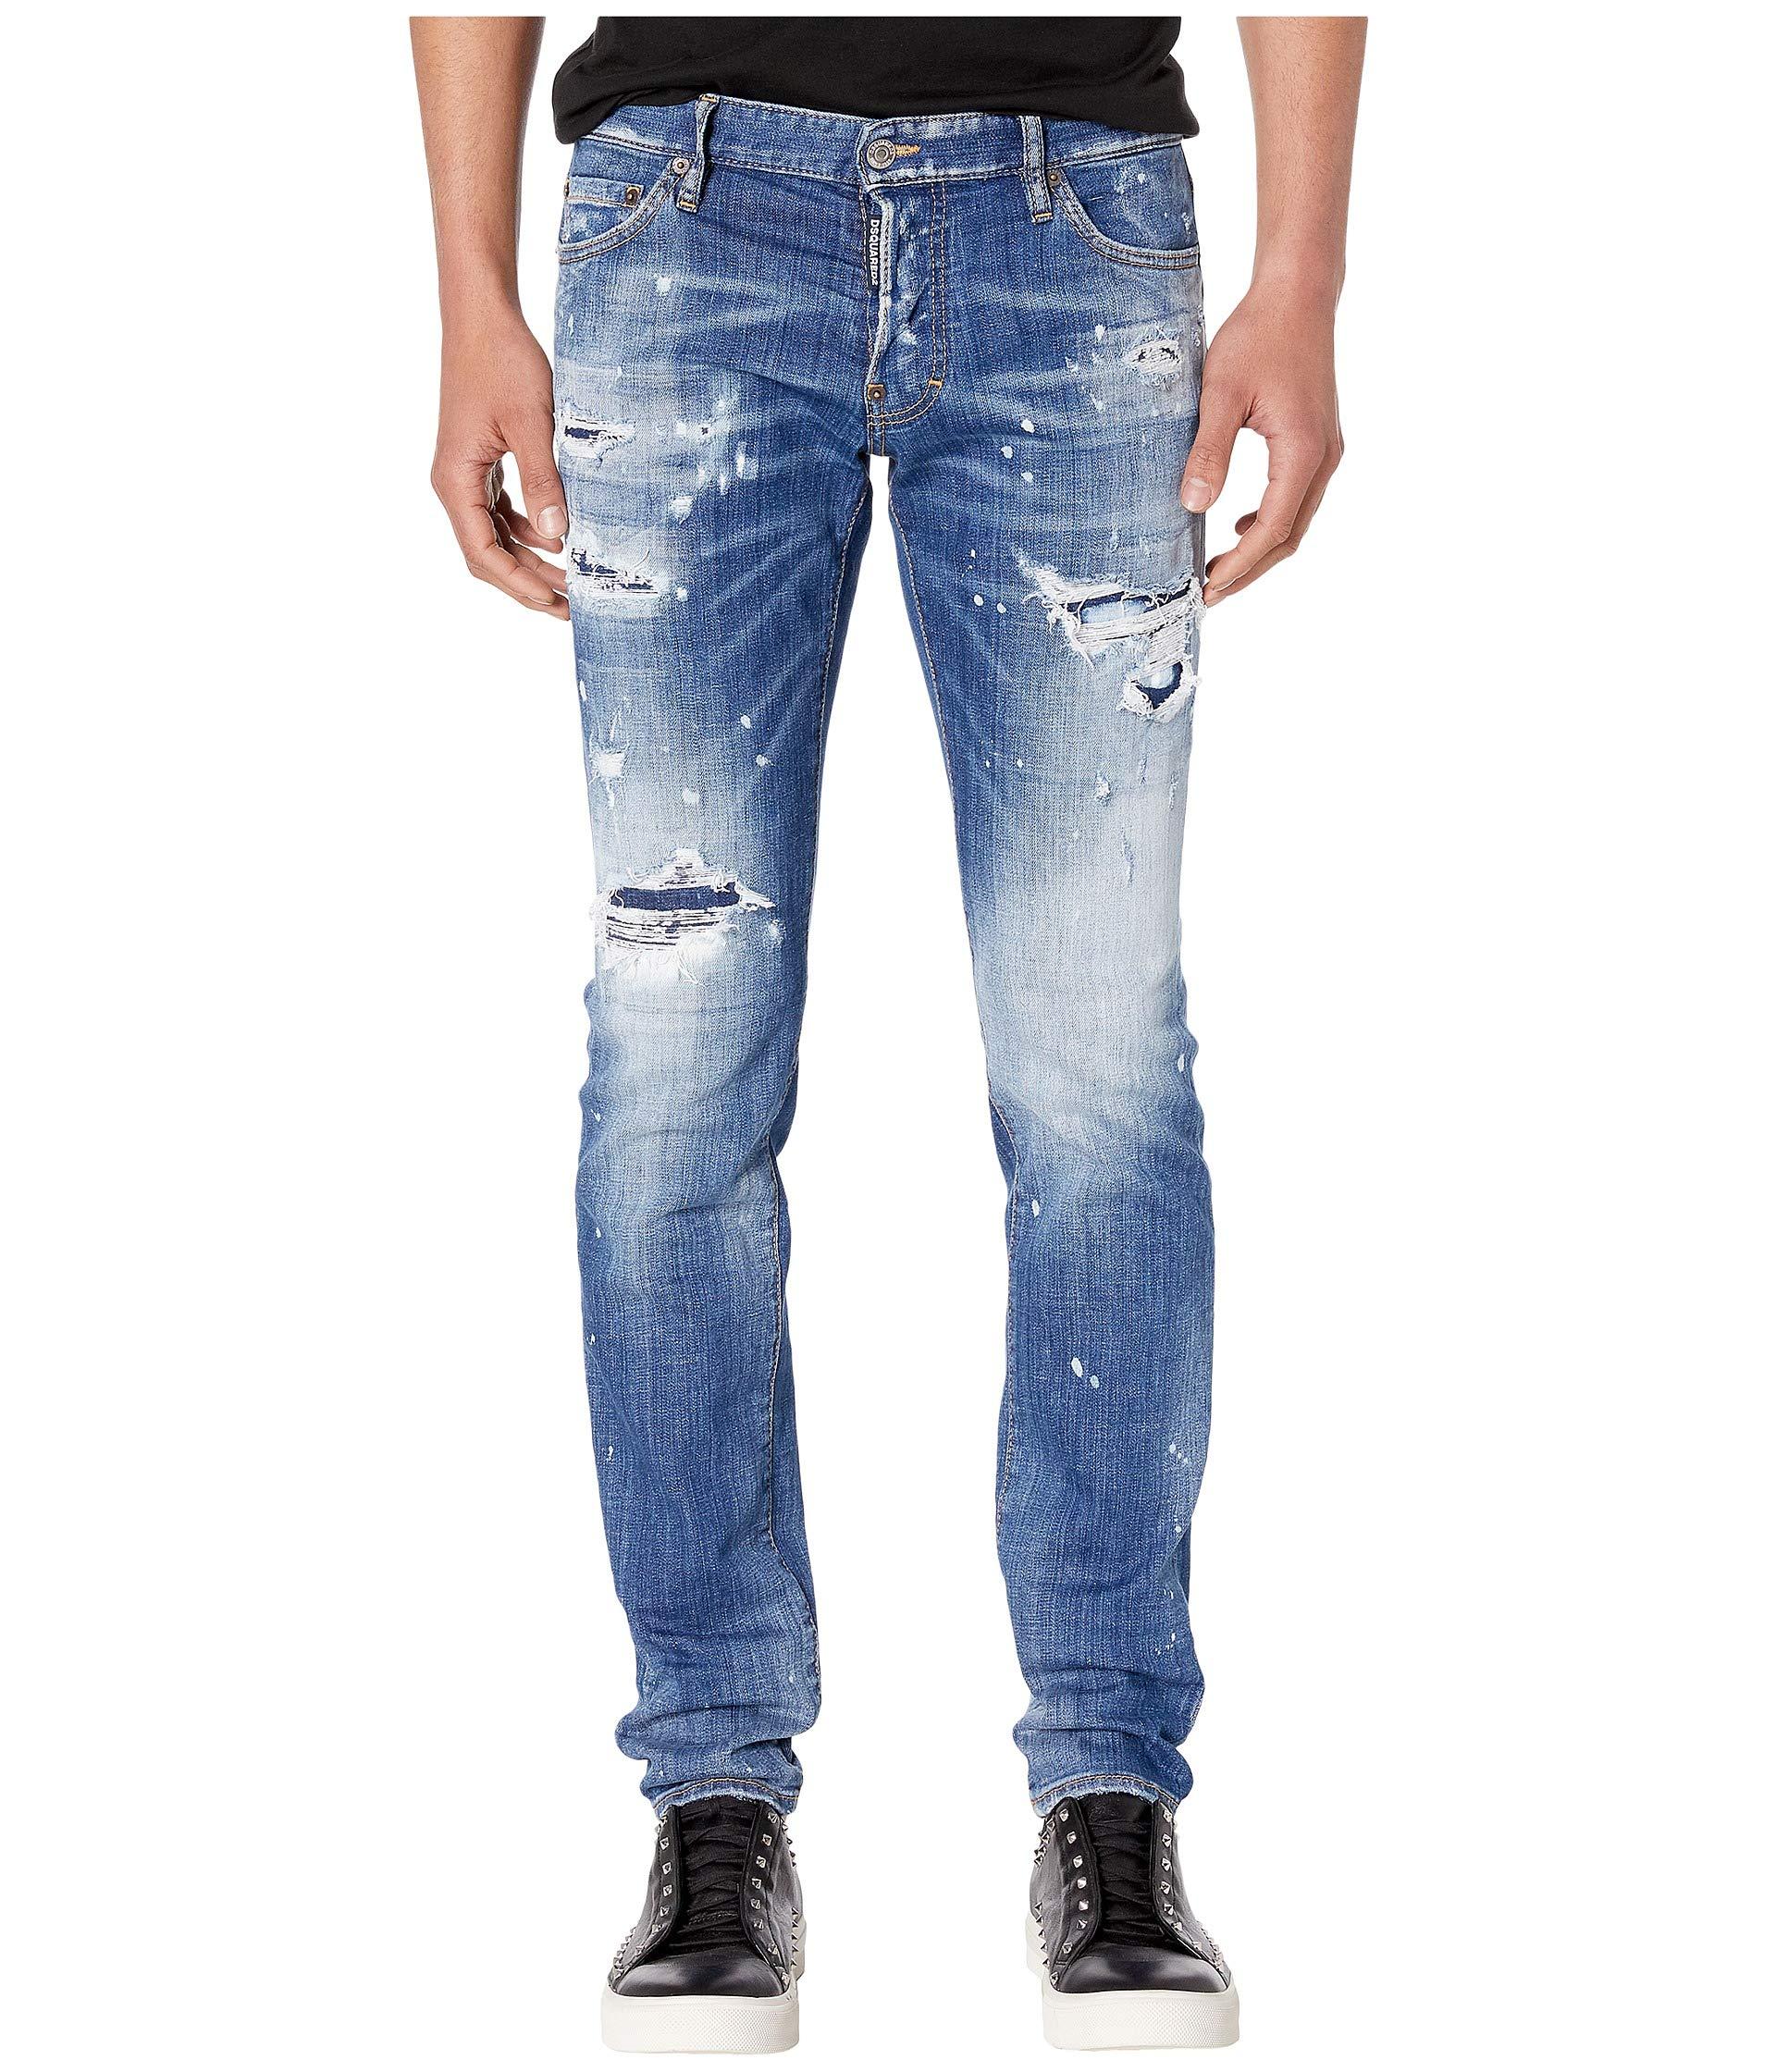 DSquared² Denim Ripped White Spots Wash Slim Jeans in Blue for Men - Lyst